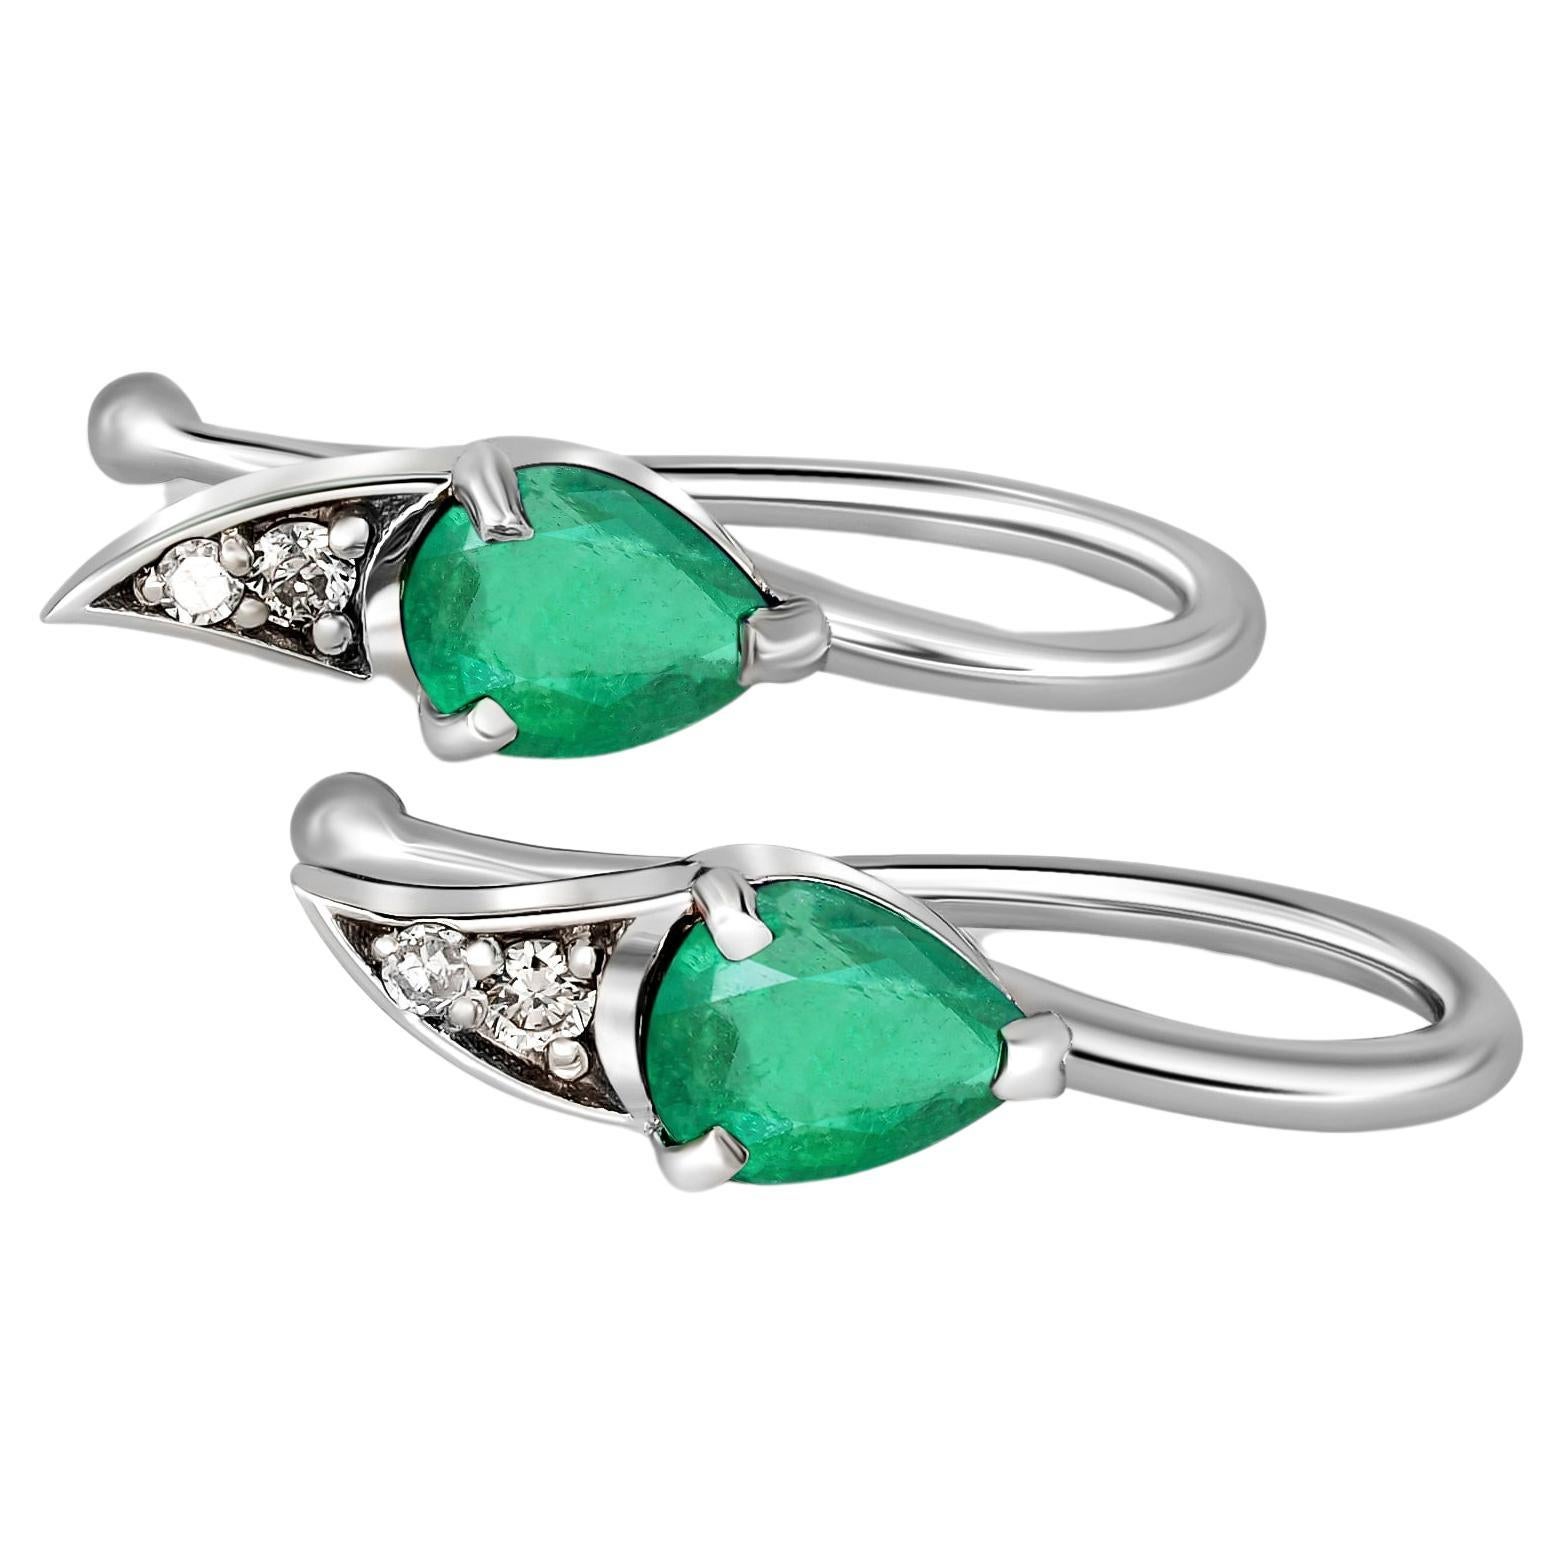 14k gold earrings with natural emerald and diamonds. For Sale